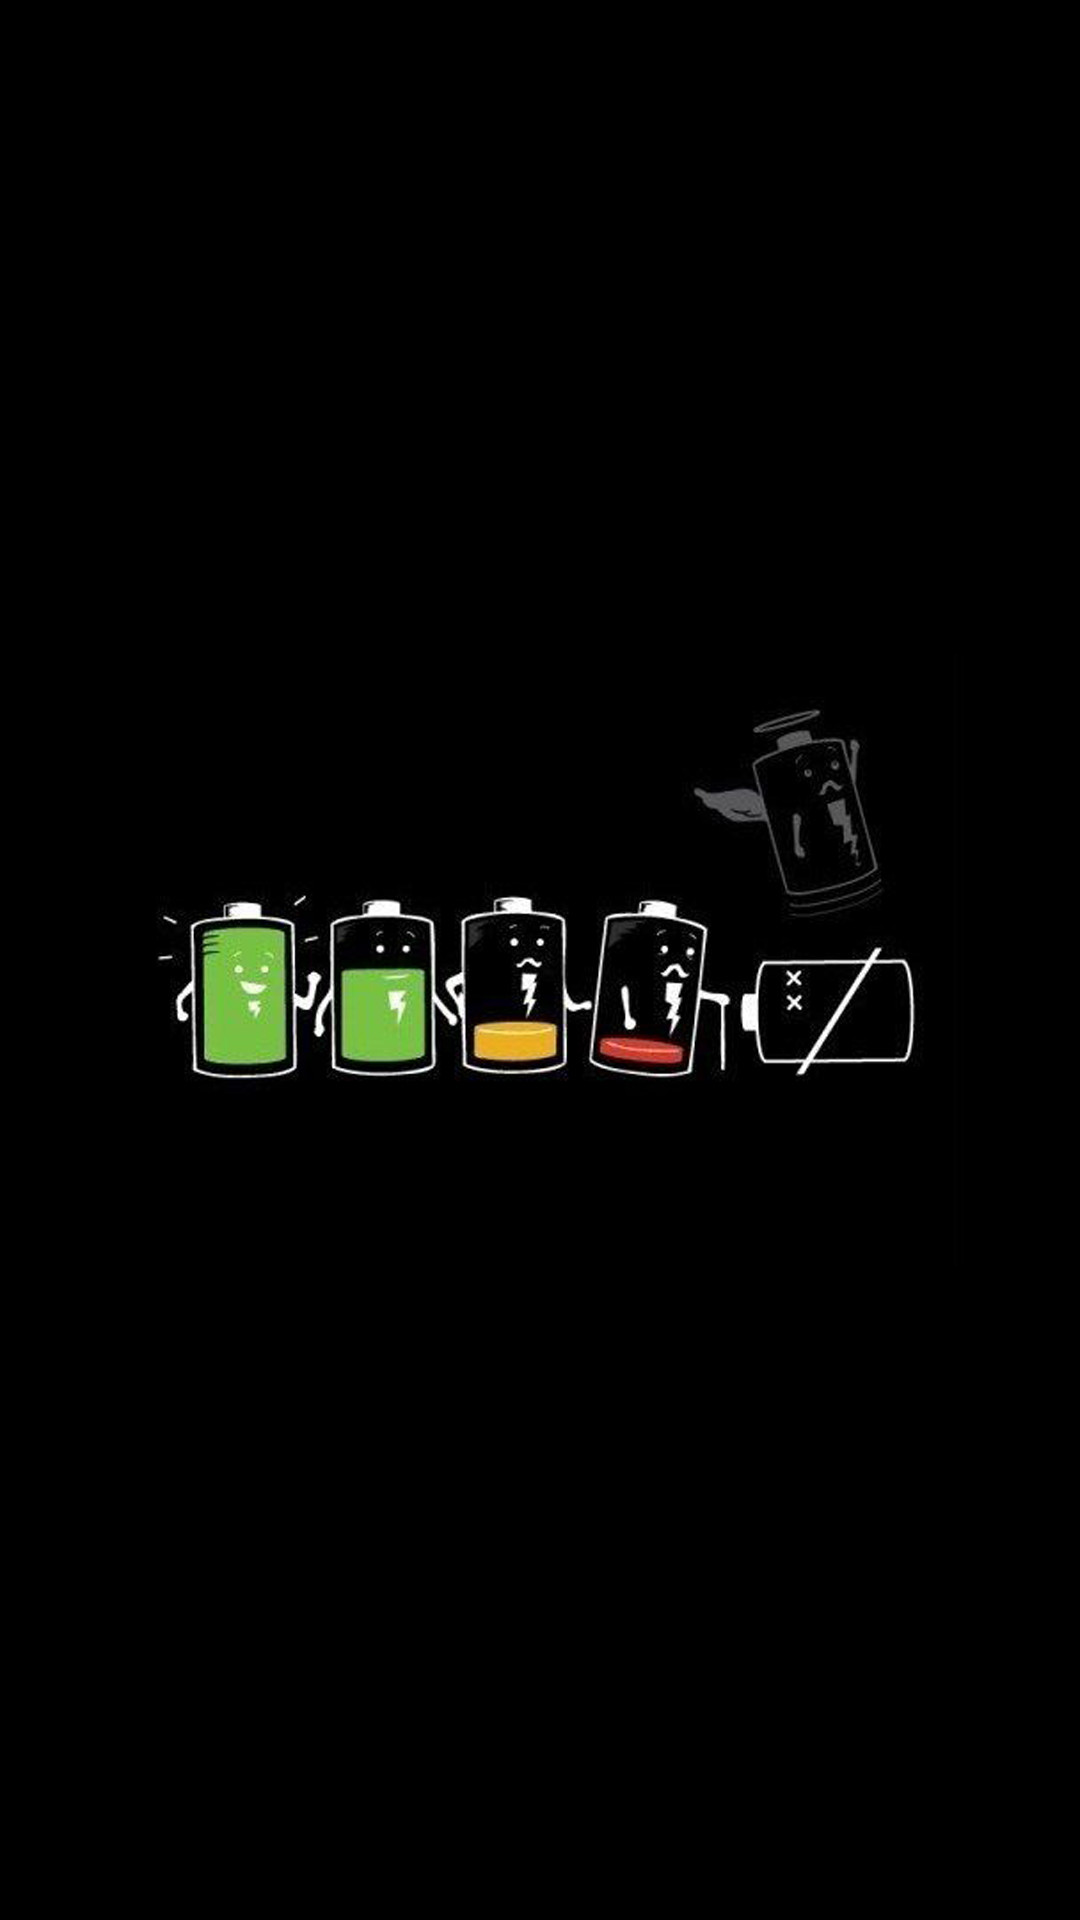 Battery Life Cycle Funny Iphone 6 Hd Wallpaper Http Freebestpicture 1080x1920